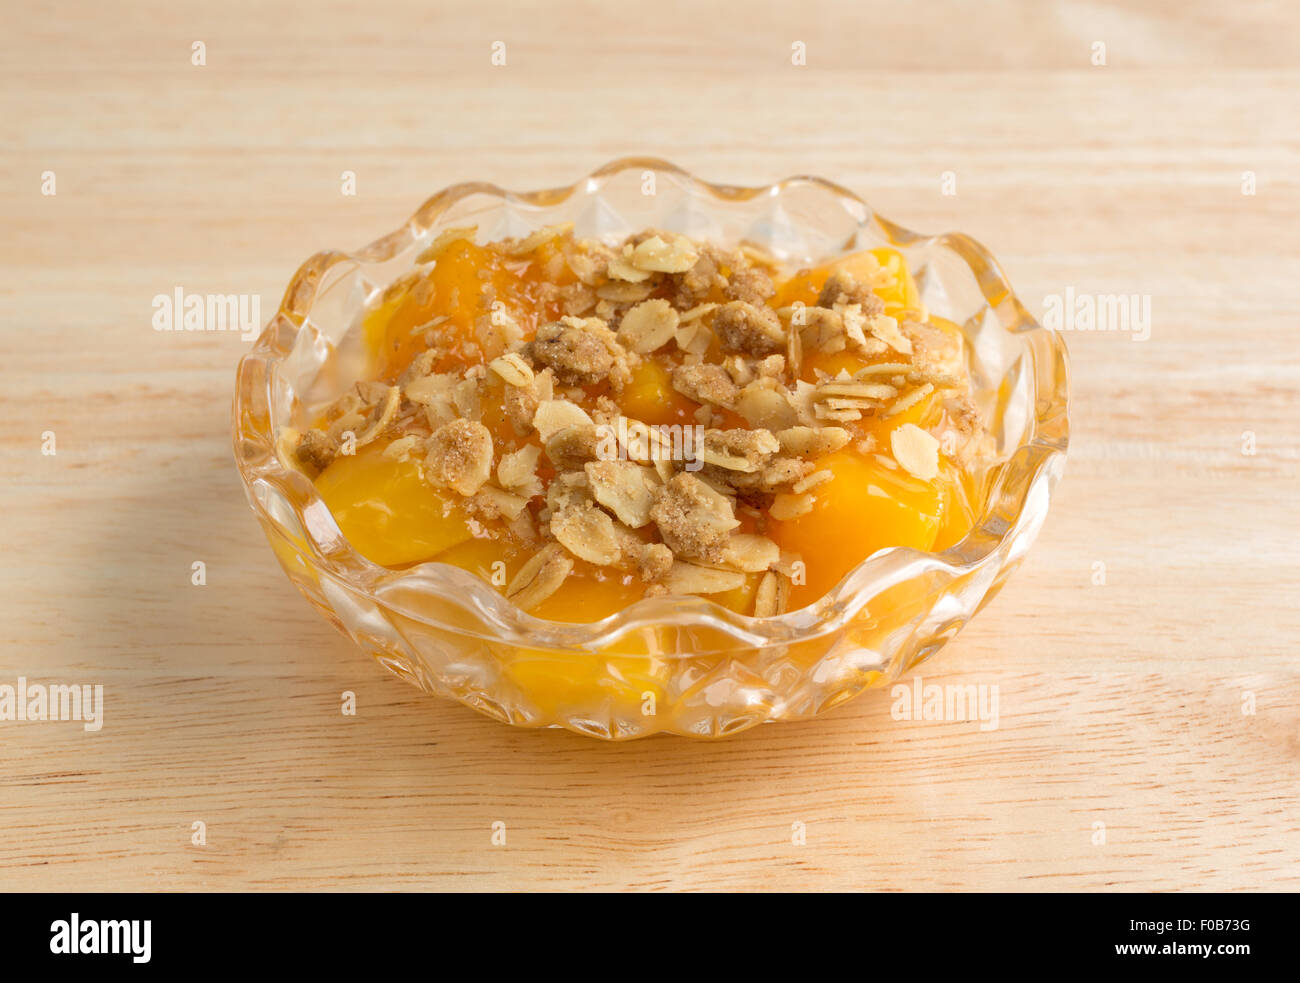 A small glass bowl of diced peaches in heavy syrup with oats and brown sugar topping on a wood table top Stock Photo